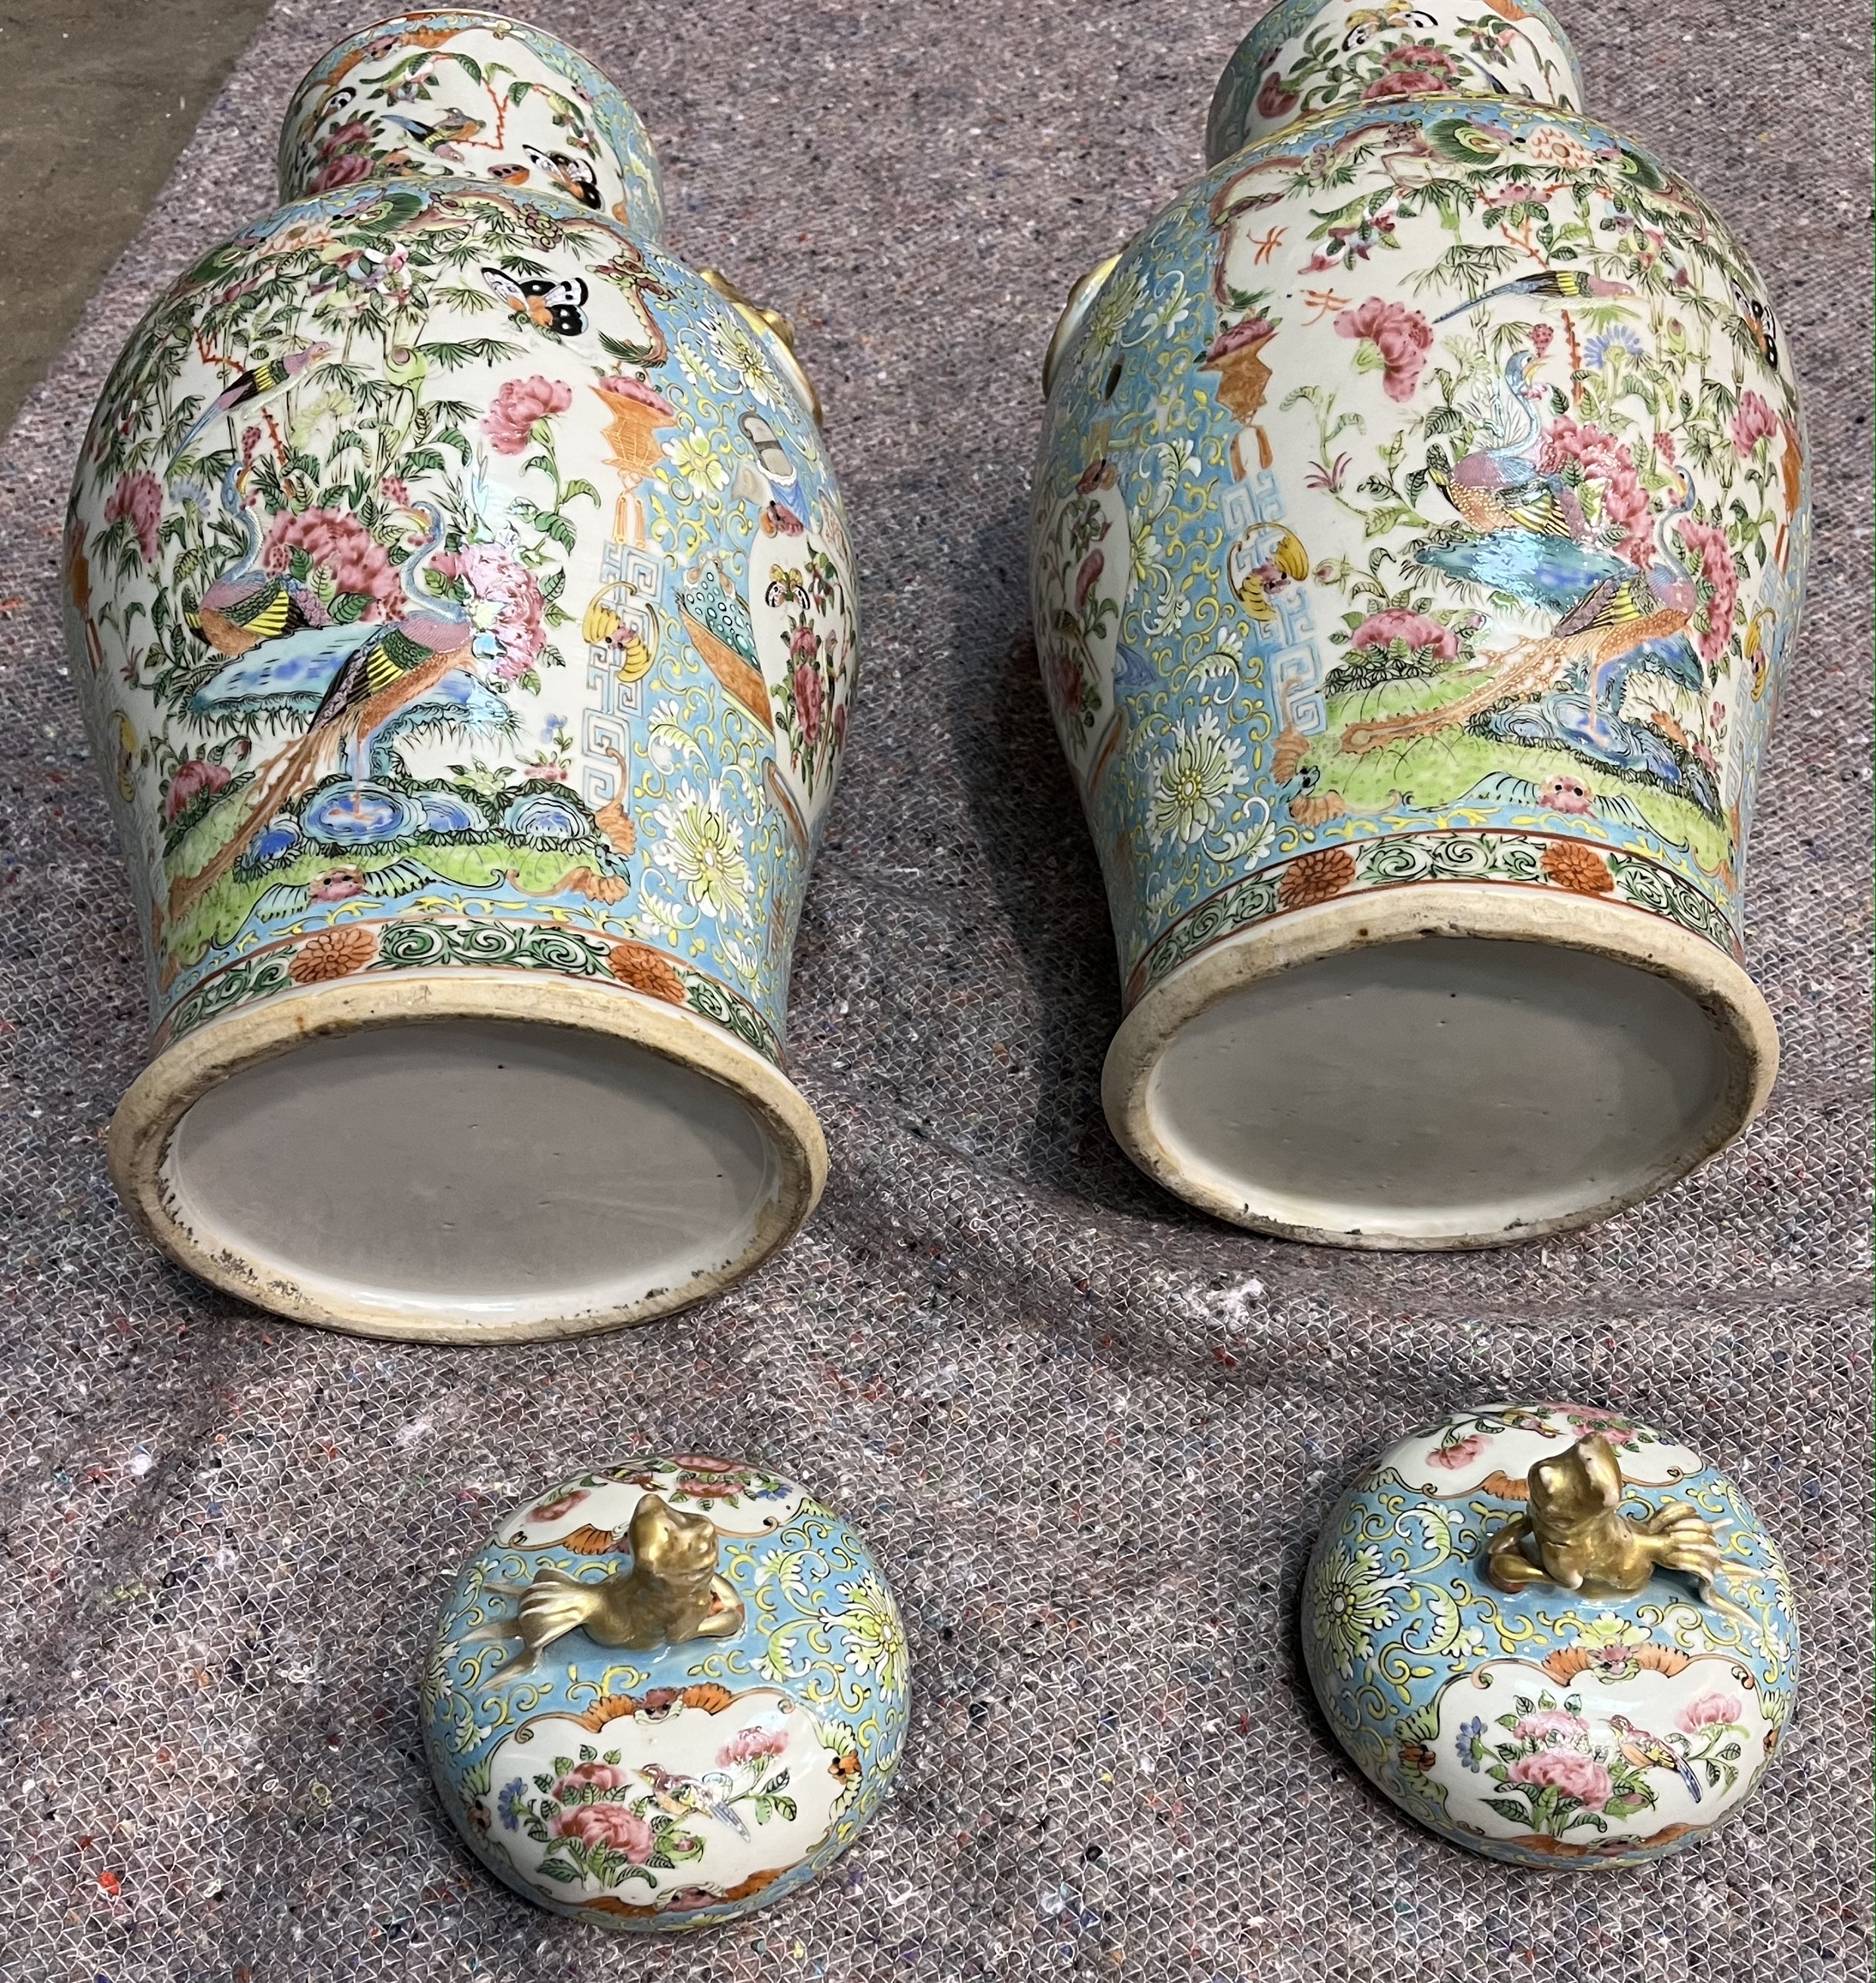 A LARGE PAIR OF CHINESE ‘FAMILLE-ROSE’ PORCELAIN VASES AND COVERS, QING DYNASTY, CIRCA 1900 - Image 5 of 7